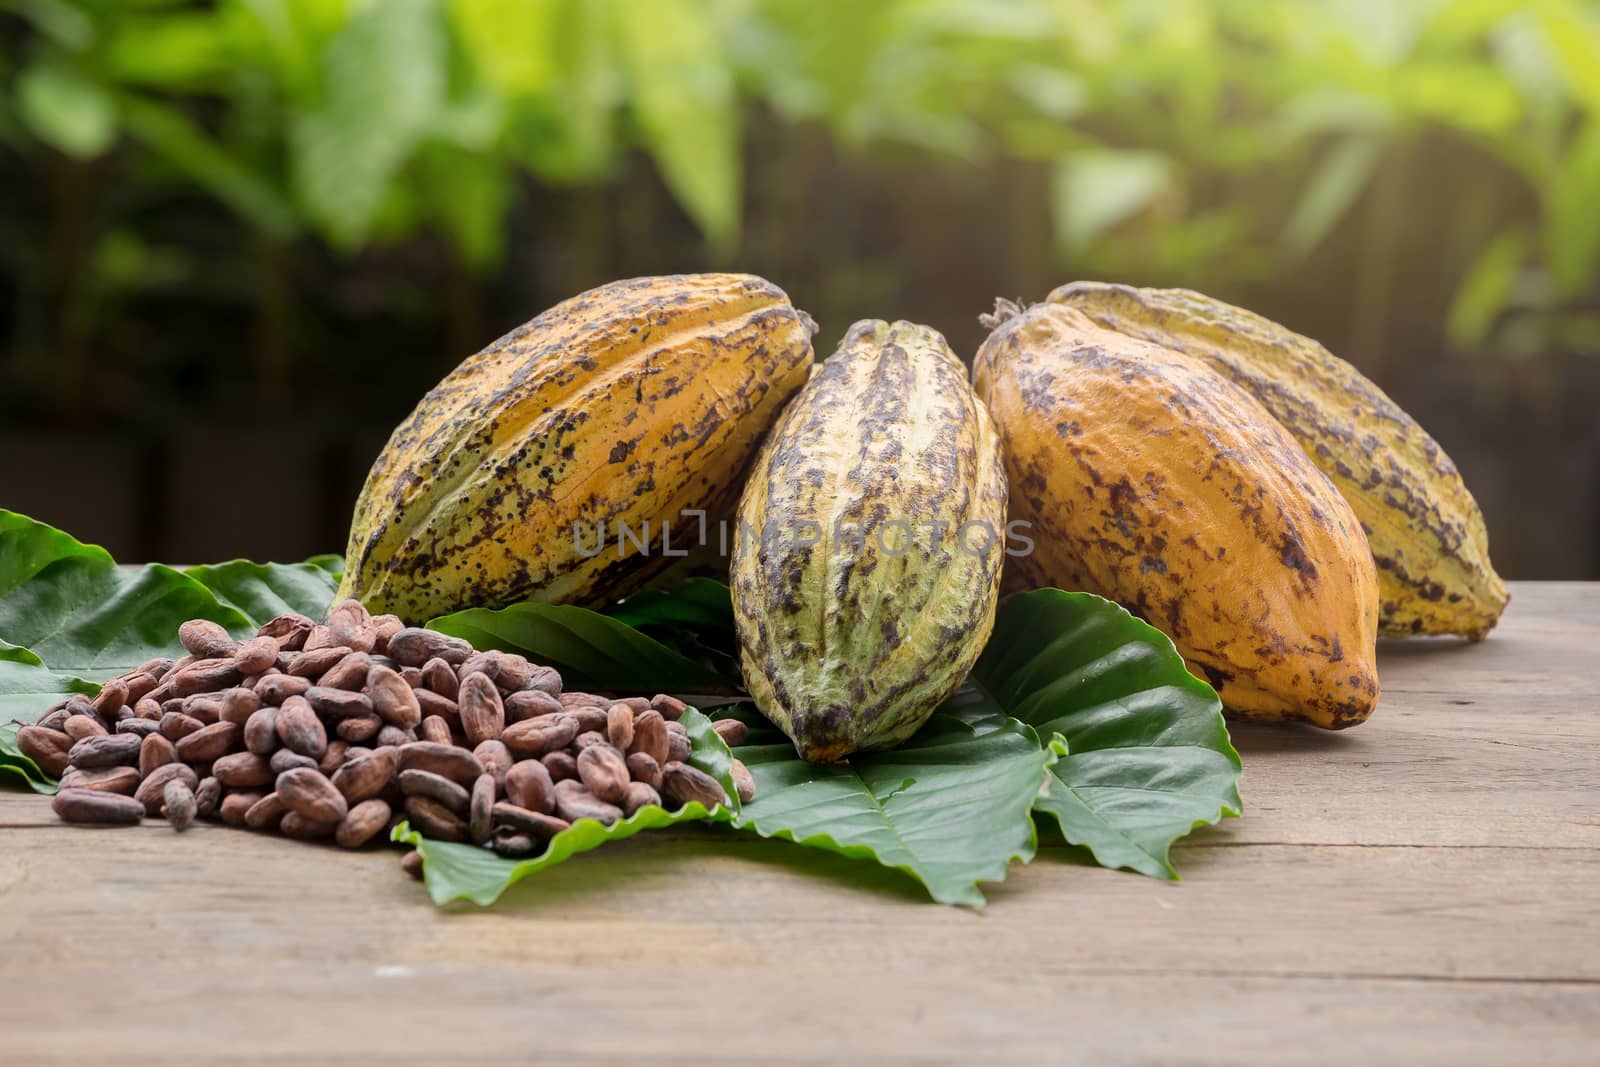 Raw Cocoa beans and cocoa pod on a wooden surface by kaiskynet